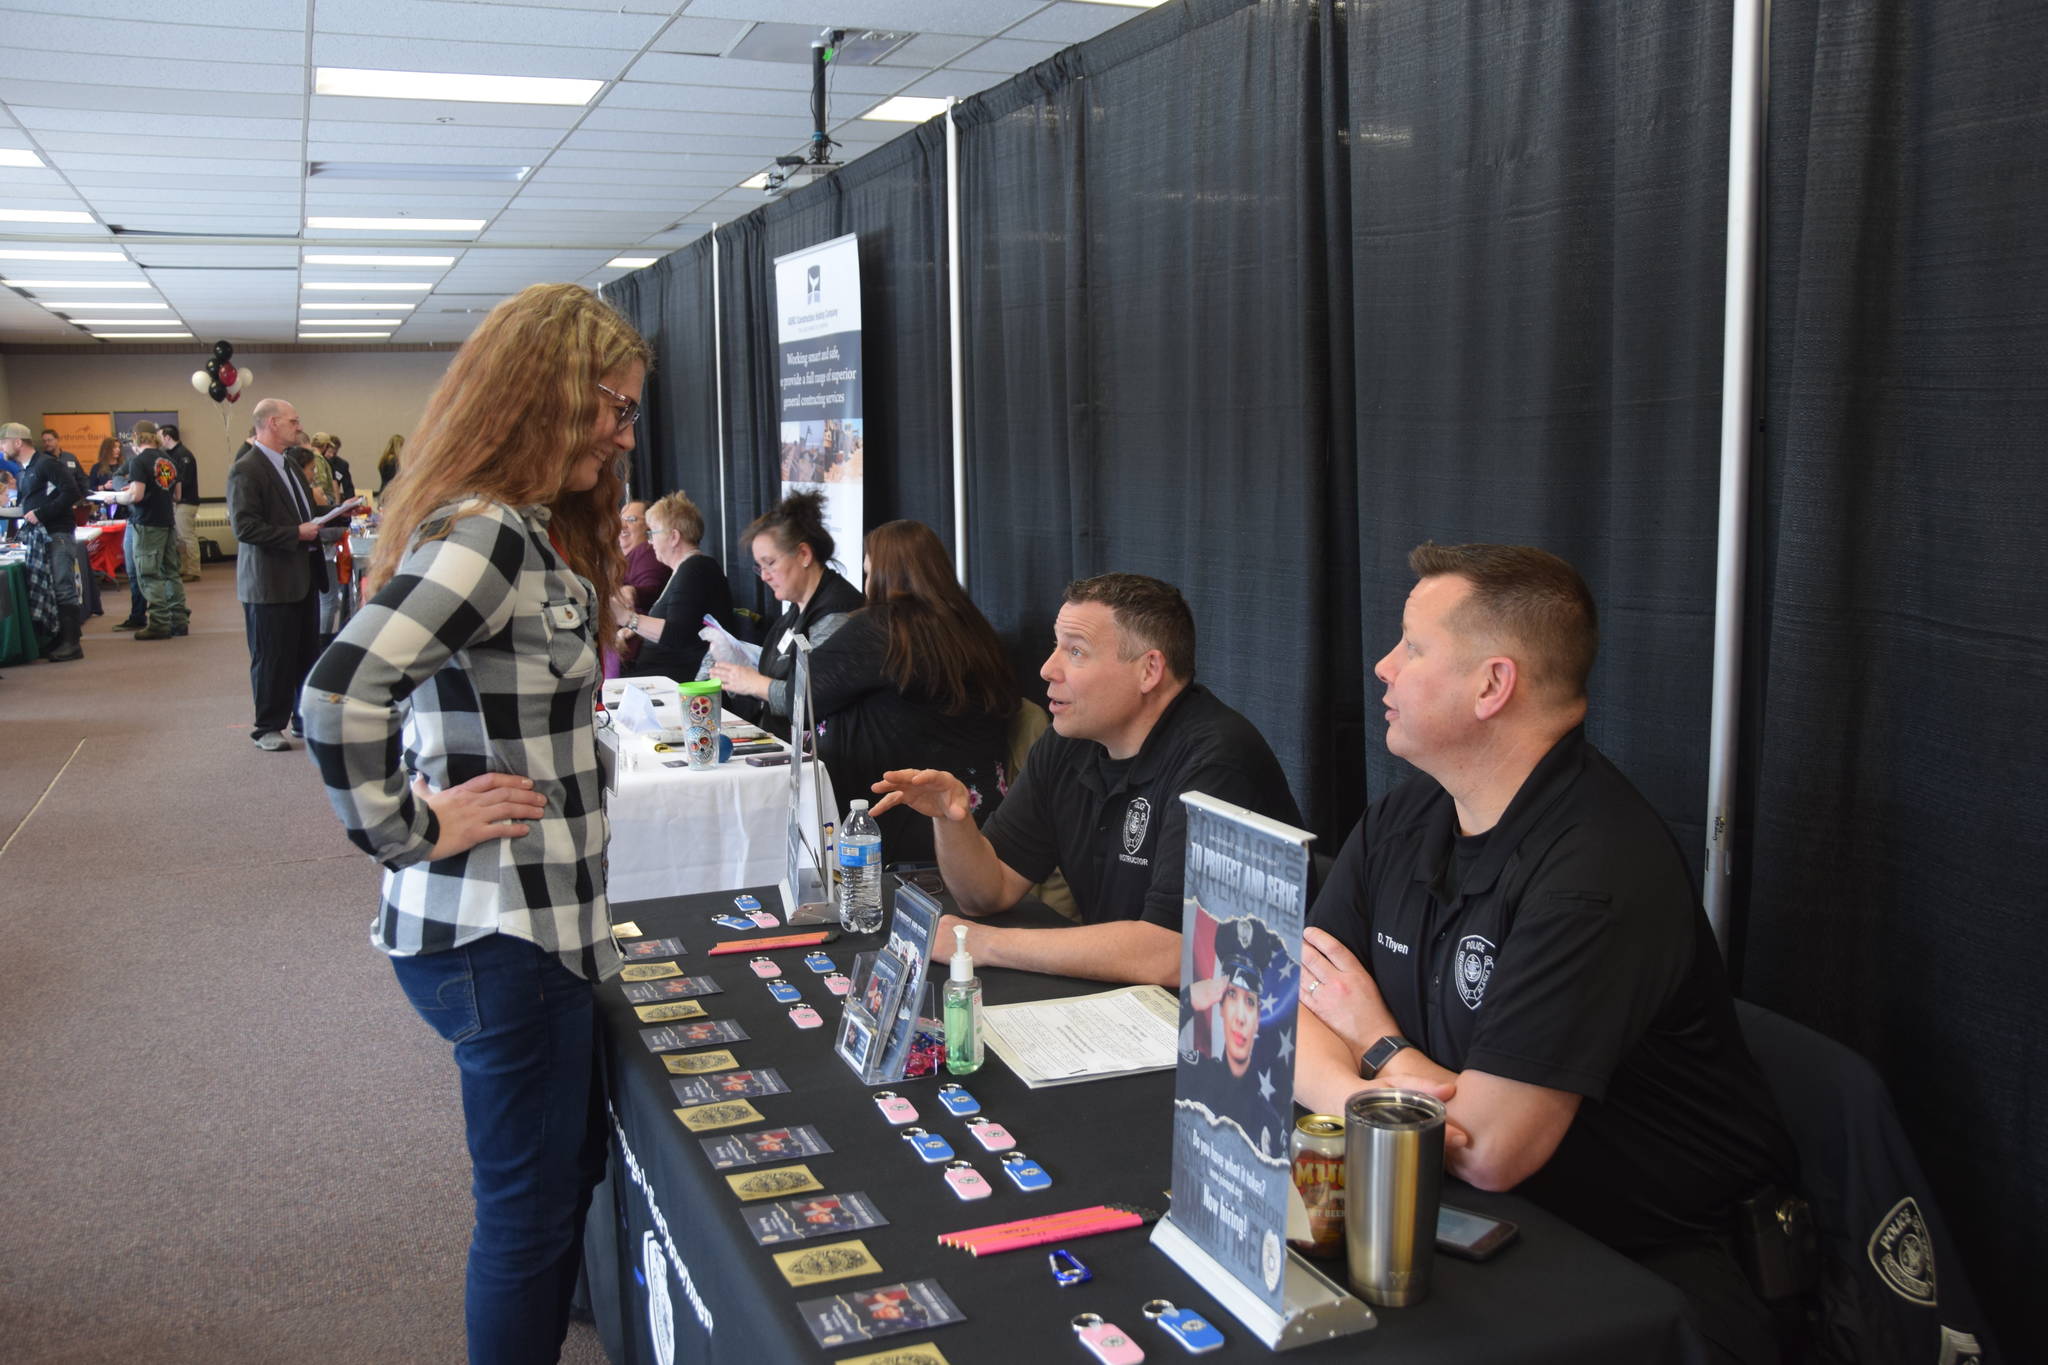 Sgt. Mike Jensen from the Anchorage Police Department talks to a participant of the Peninsula Job Fair at the Soldotna Regional Sports Complex in Soldotna, Alaska, on March 21, 2019. (Photo by Brian Mazurek/Peninsula Clarion)